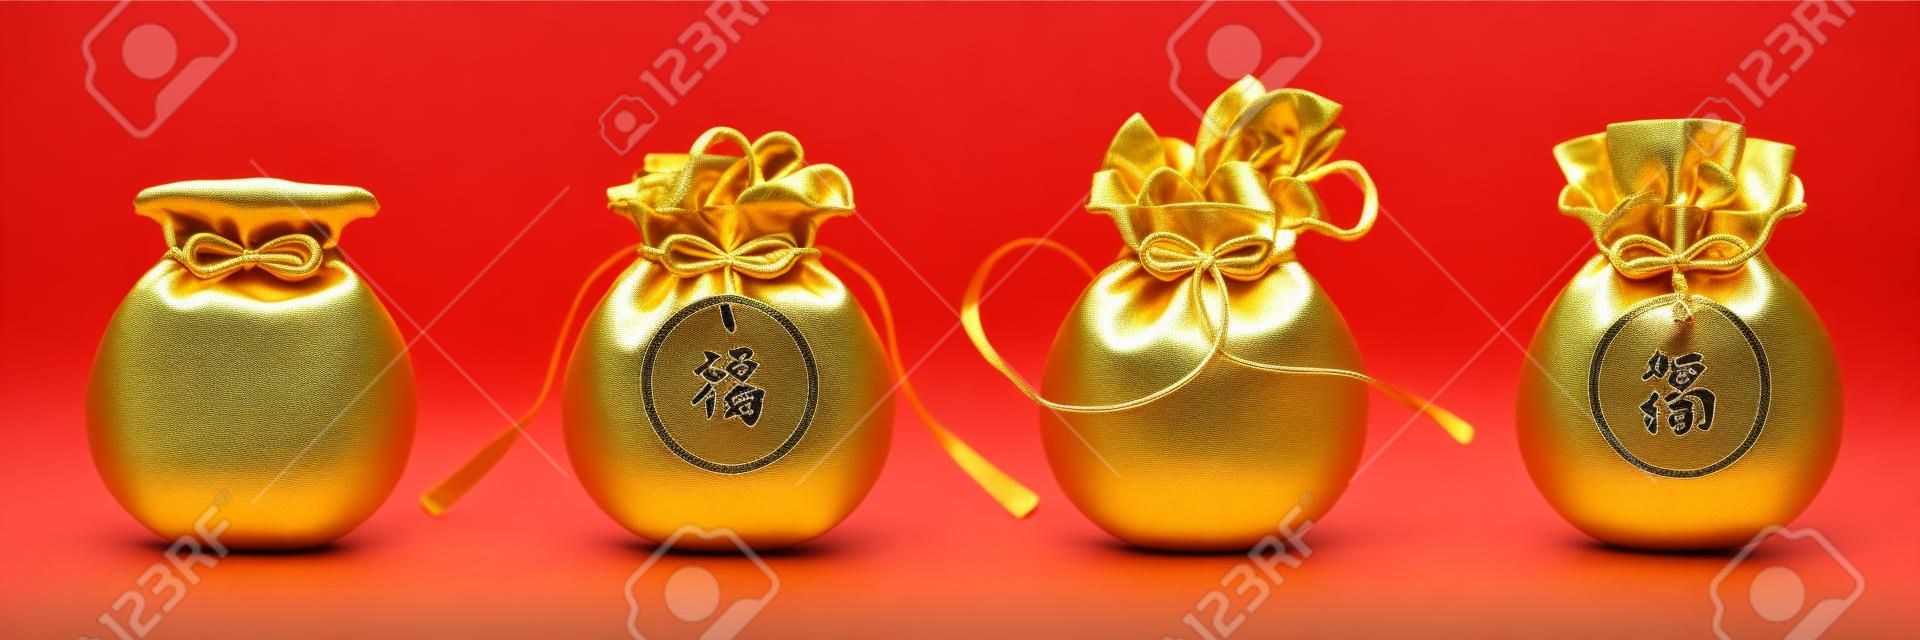 Bag with ribbon or sack with tassels, pouch with golden ingot, packet with money or hangbao, sac with chinese hieroglyph that means Good Luck or Fortune. 2020 CNY or china new year holiday